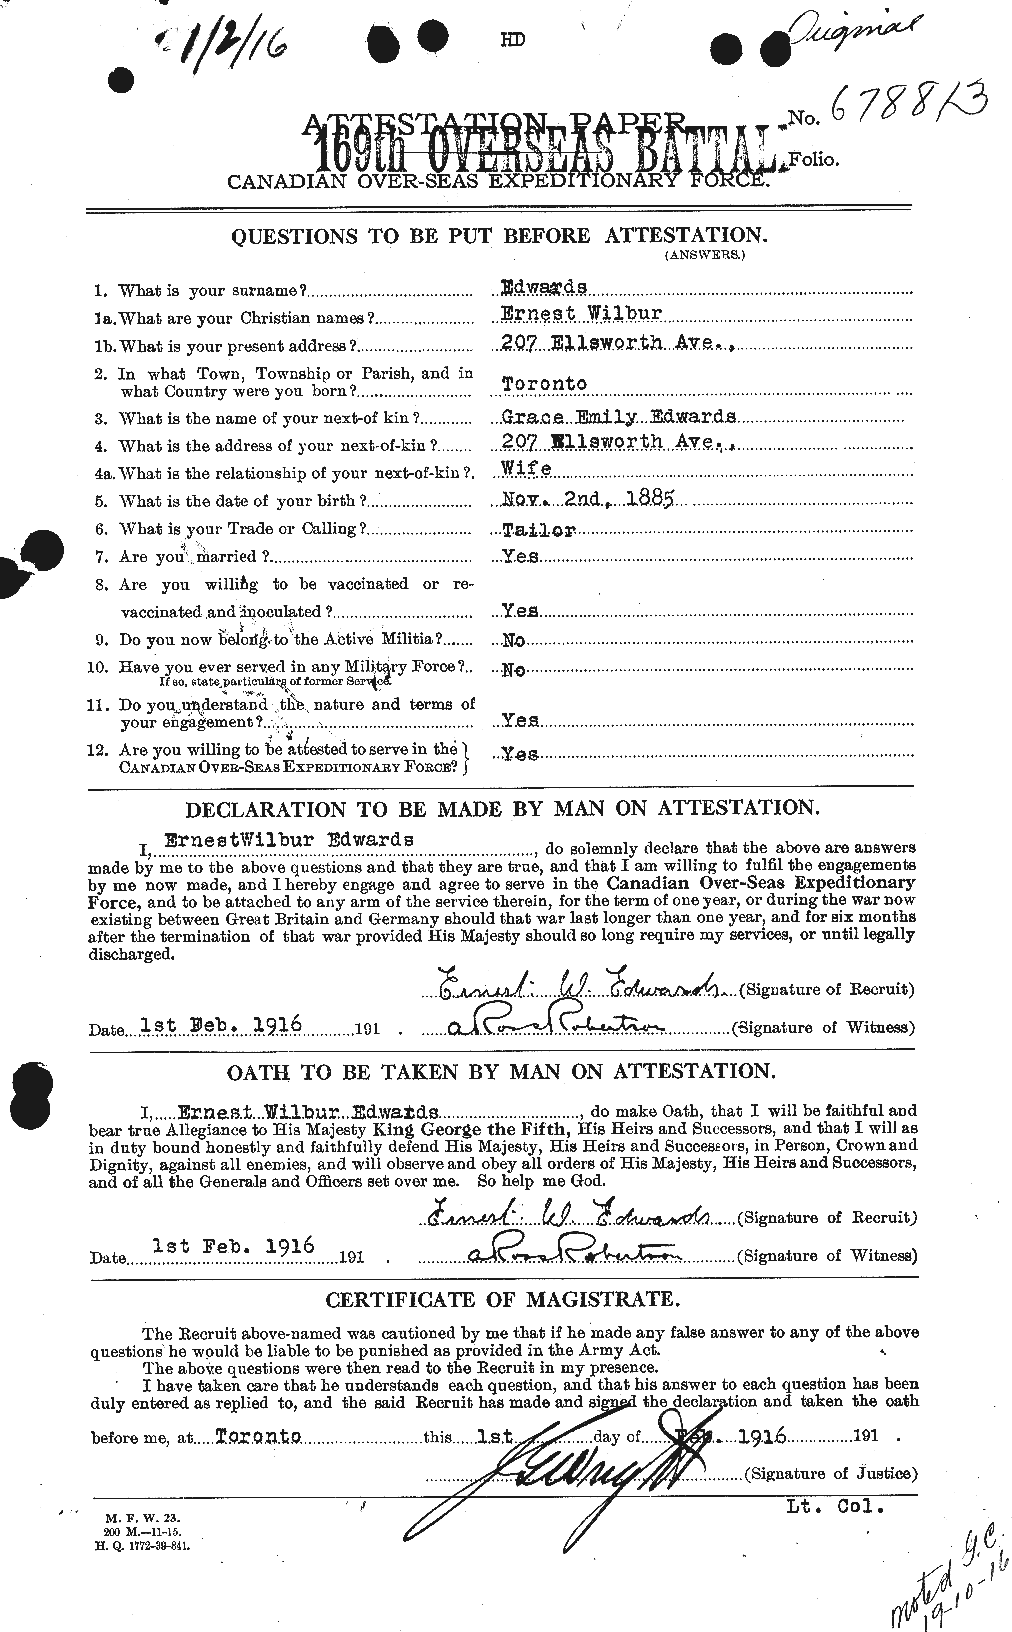 Personnel Records of the First World War - CEF 309016a